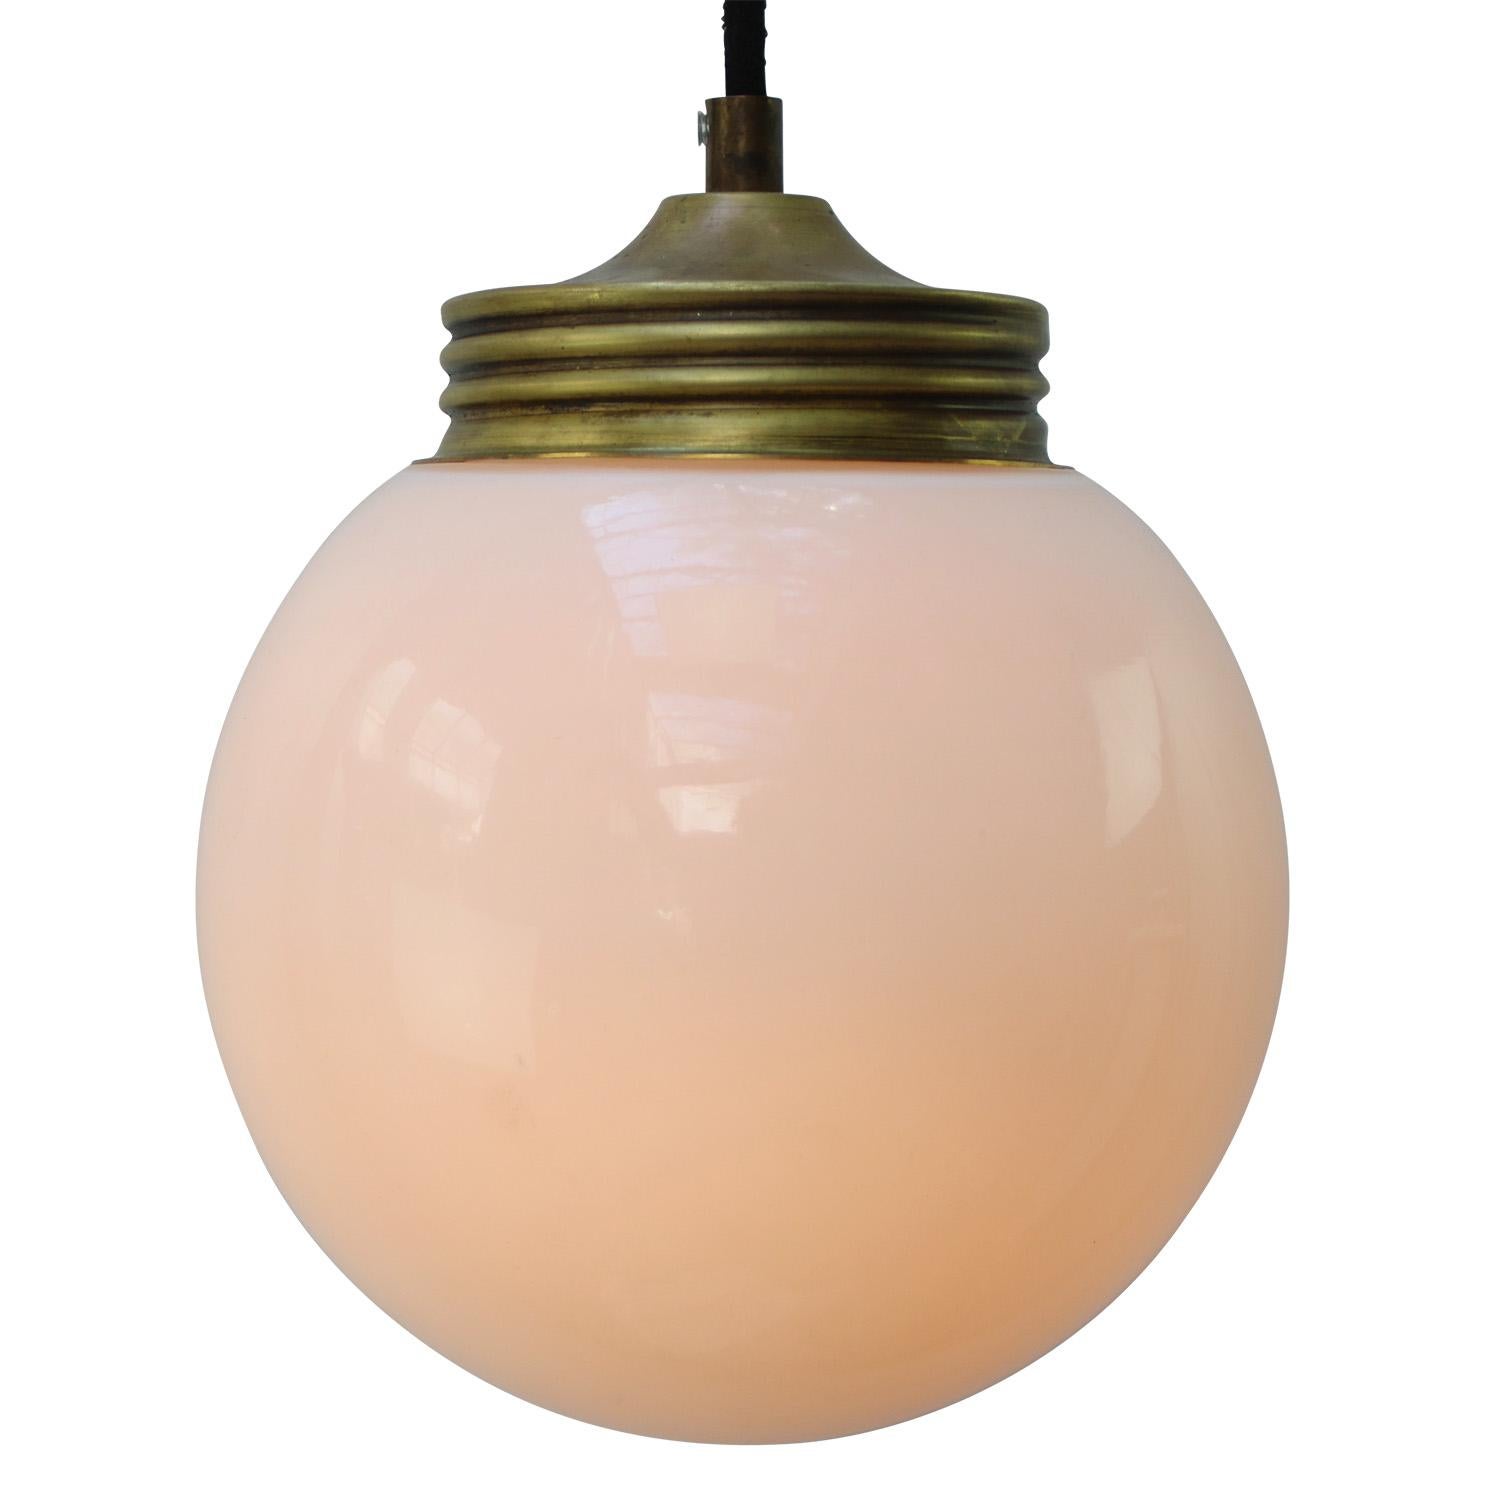 White industrial hanging lamp.
Brass and opaline glass.

Weight: 1.20 kg / 2.6 lb

Priced per individual item. All lamps have been made suitable by international standards for incandescent light bulbs, energy-efficient and LED bulbs. E26/E27 bulb